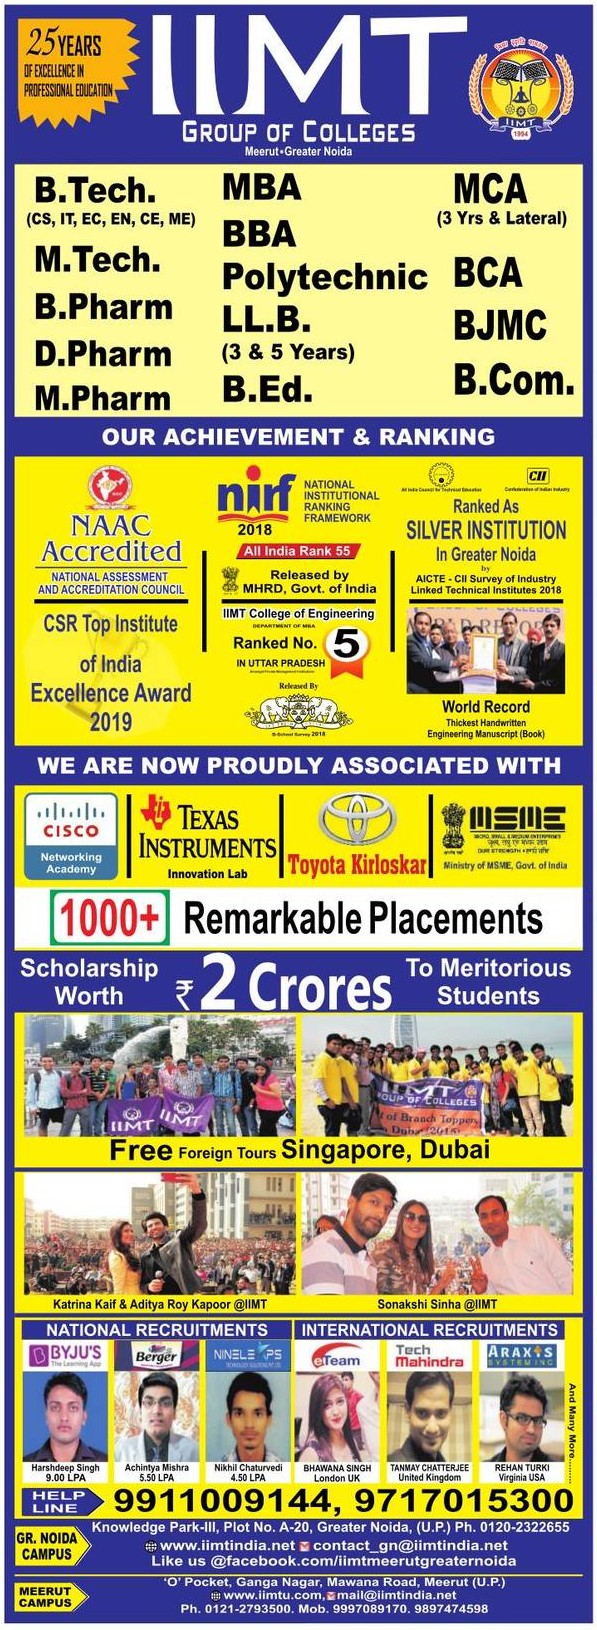 iimt-group-of-colleges-our-achievements-and-ranking-ad-amar-ujala-delhi-02-06-2019.jpg